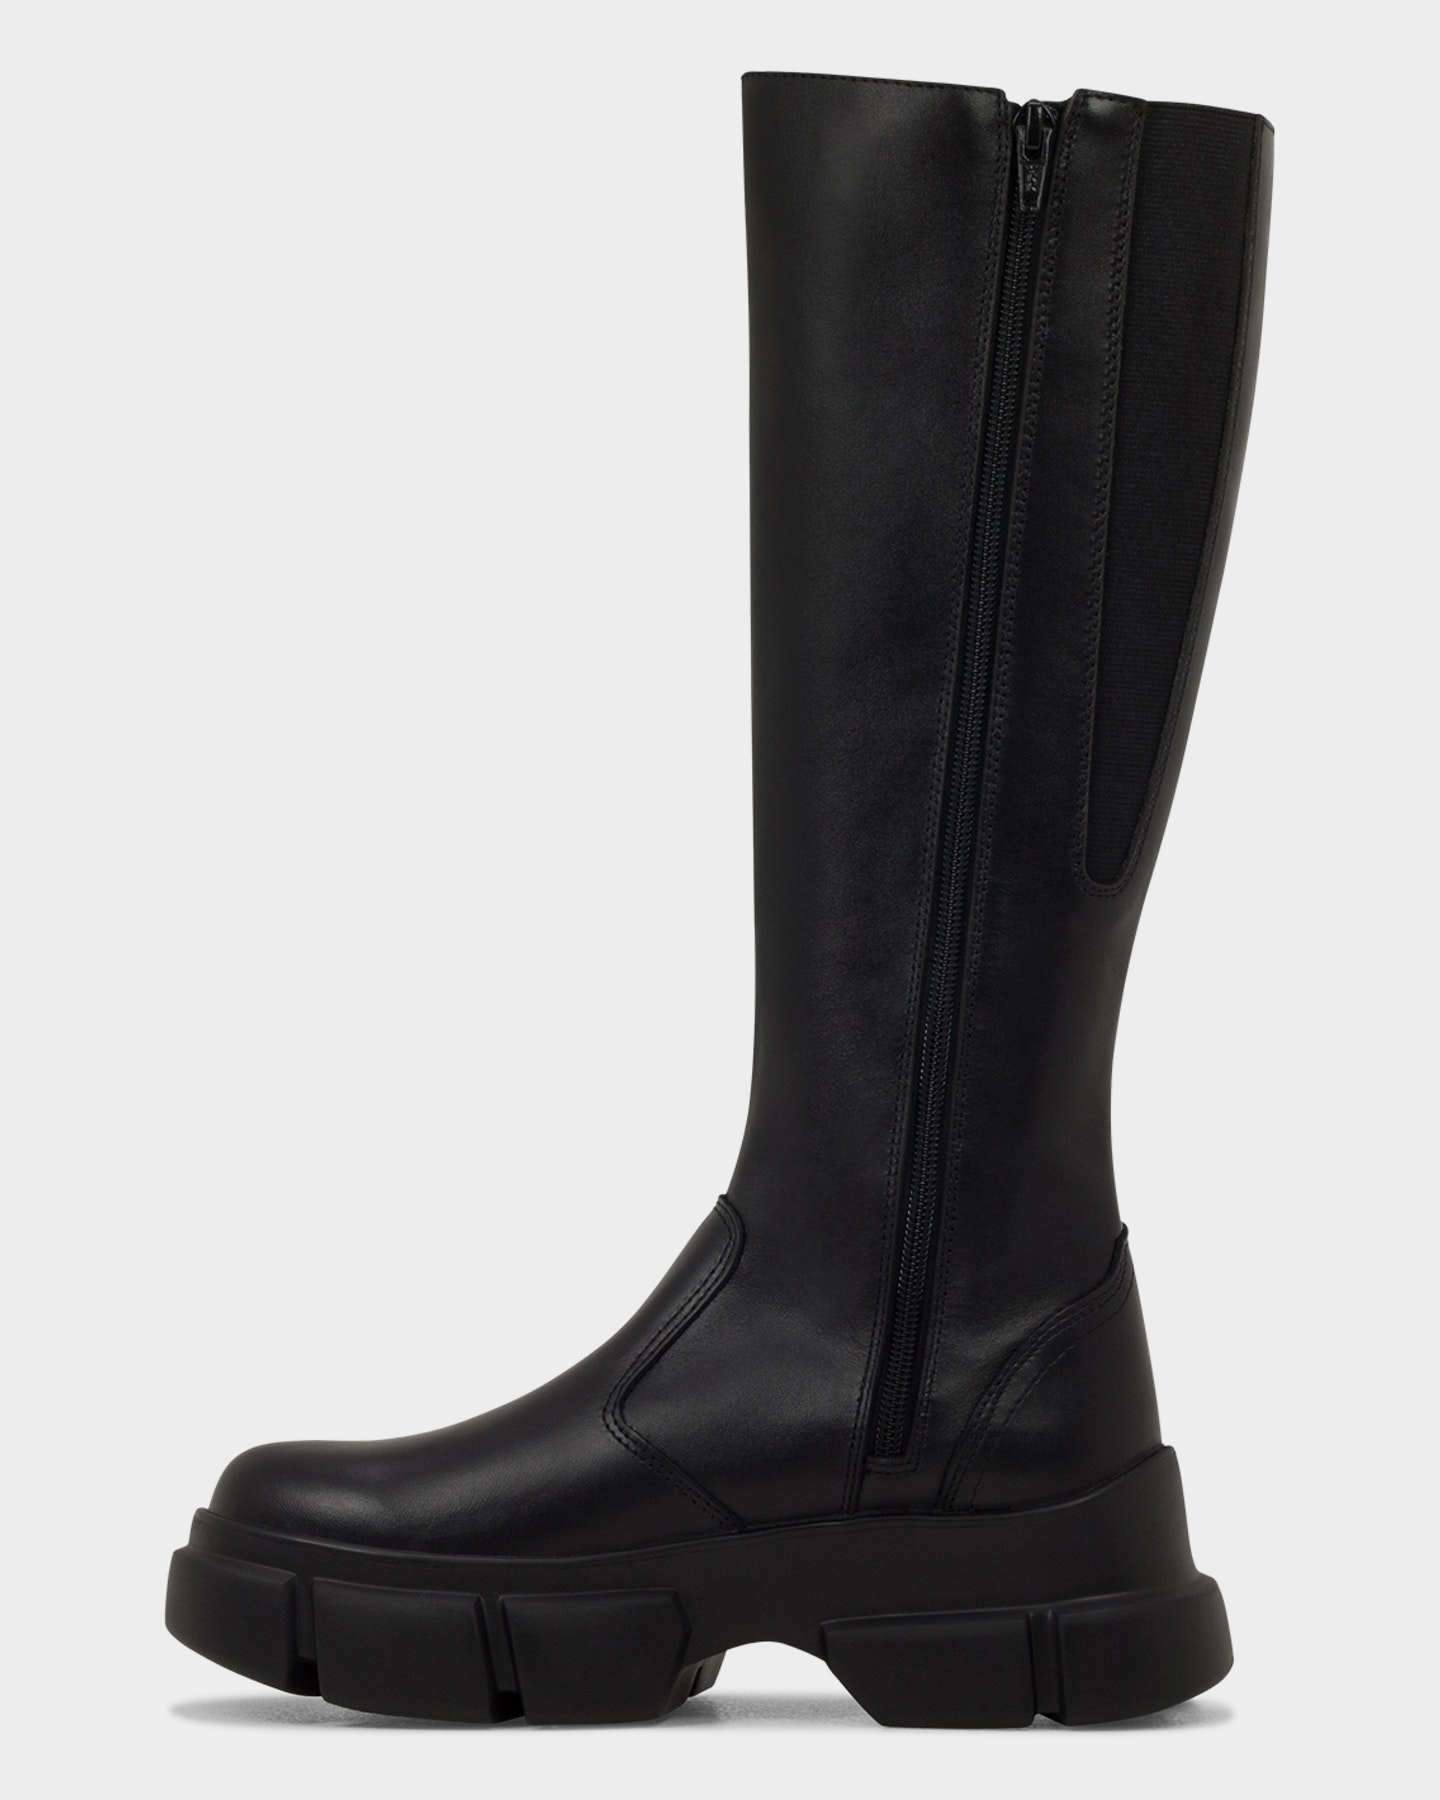 Roc Boots Rogue - Black Leather | SurfStitch